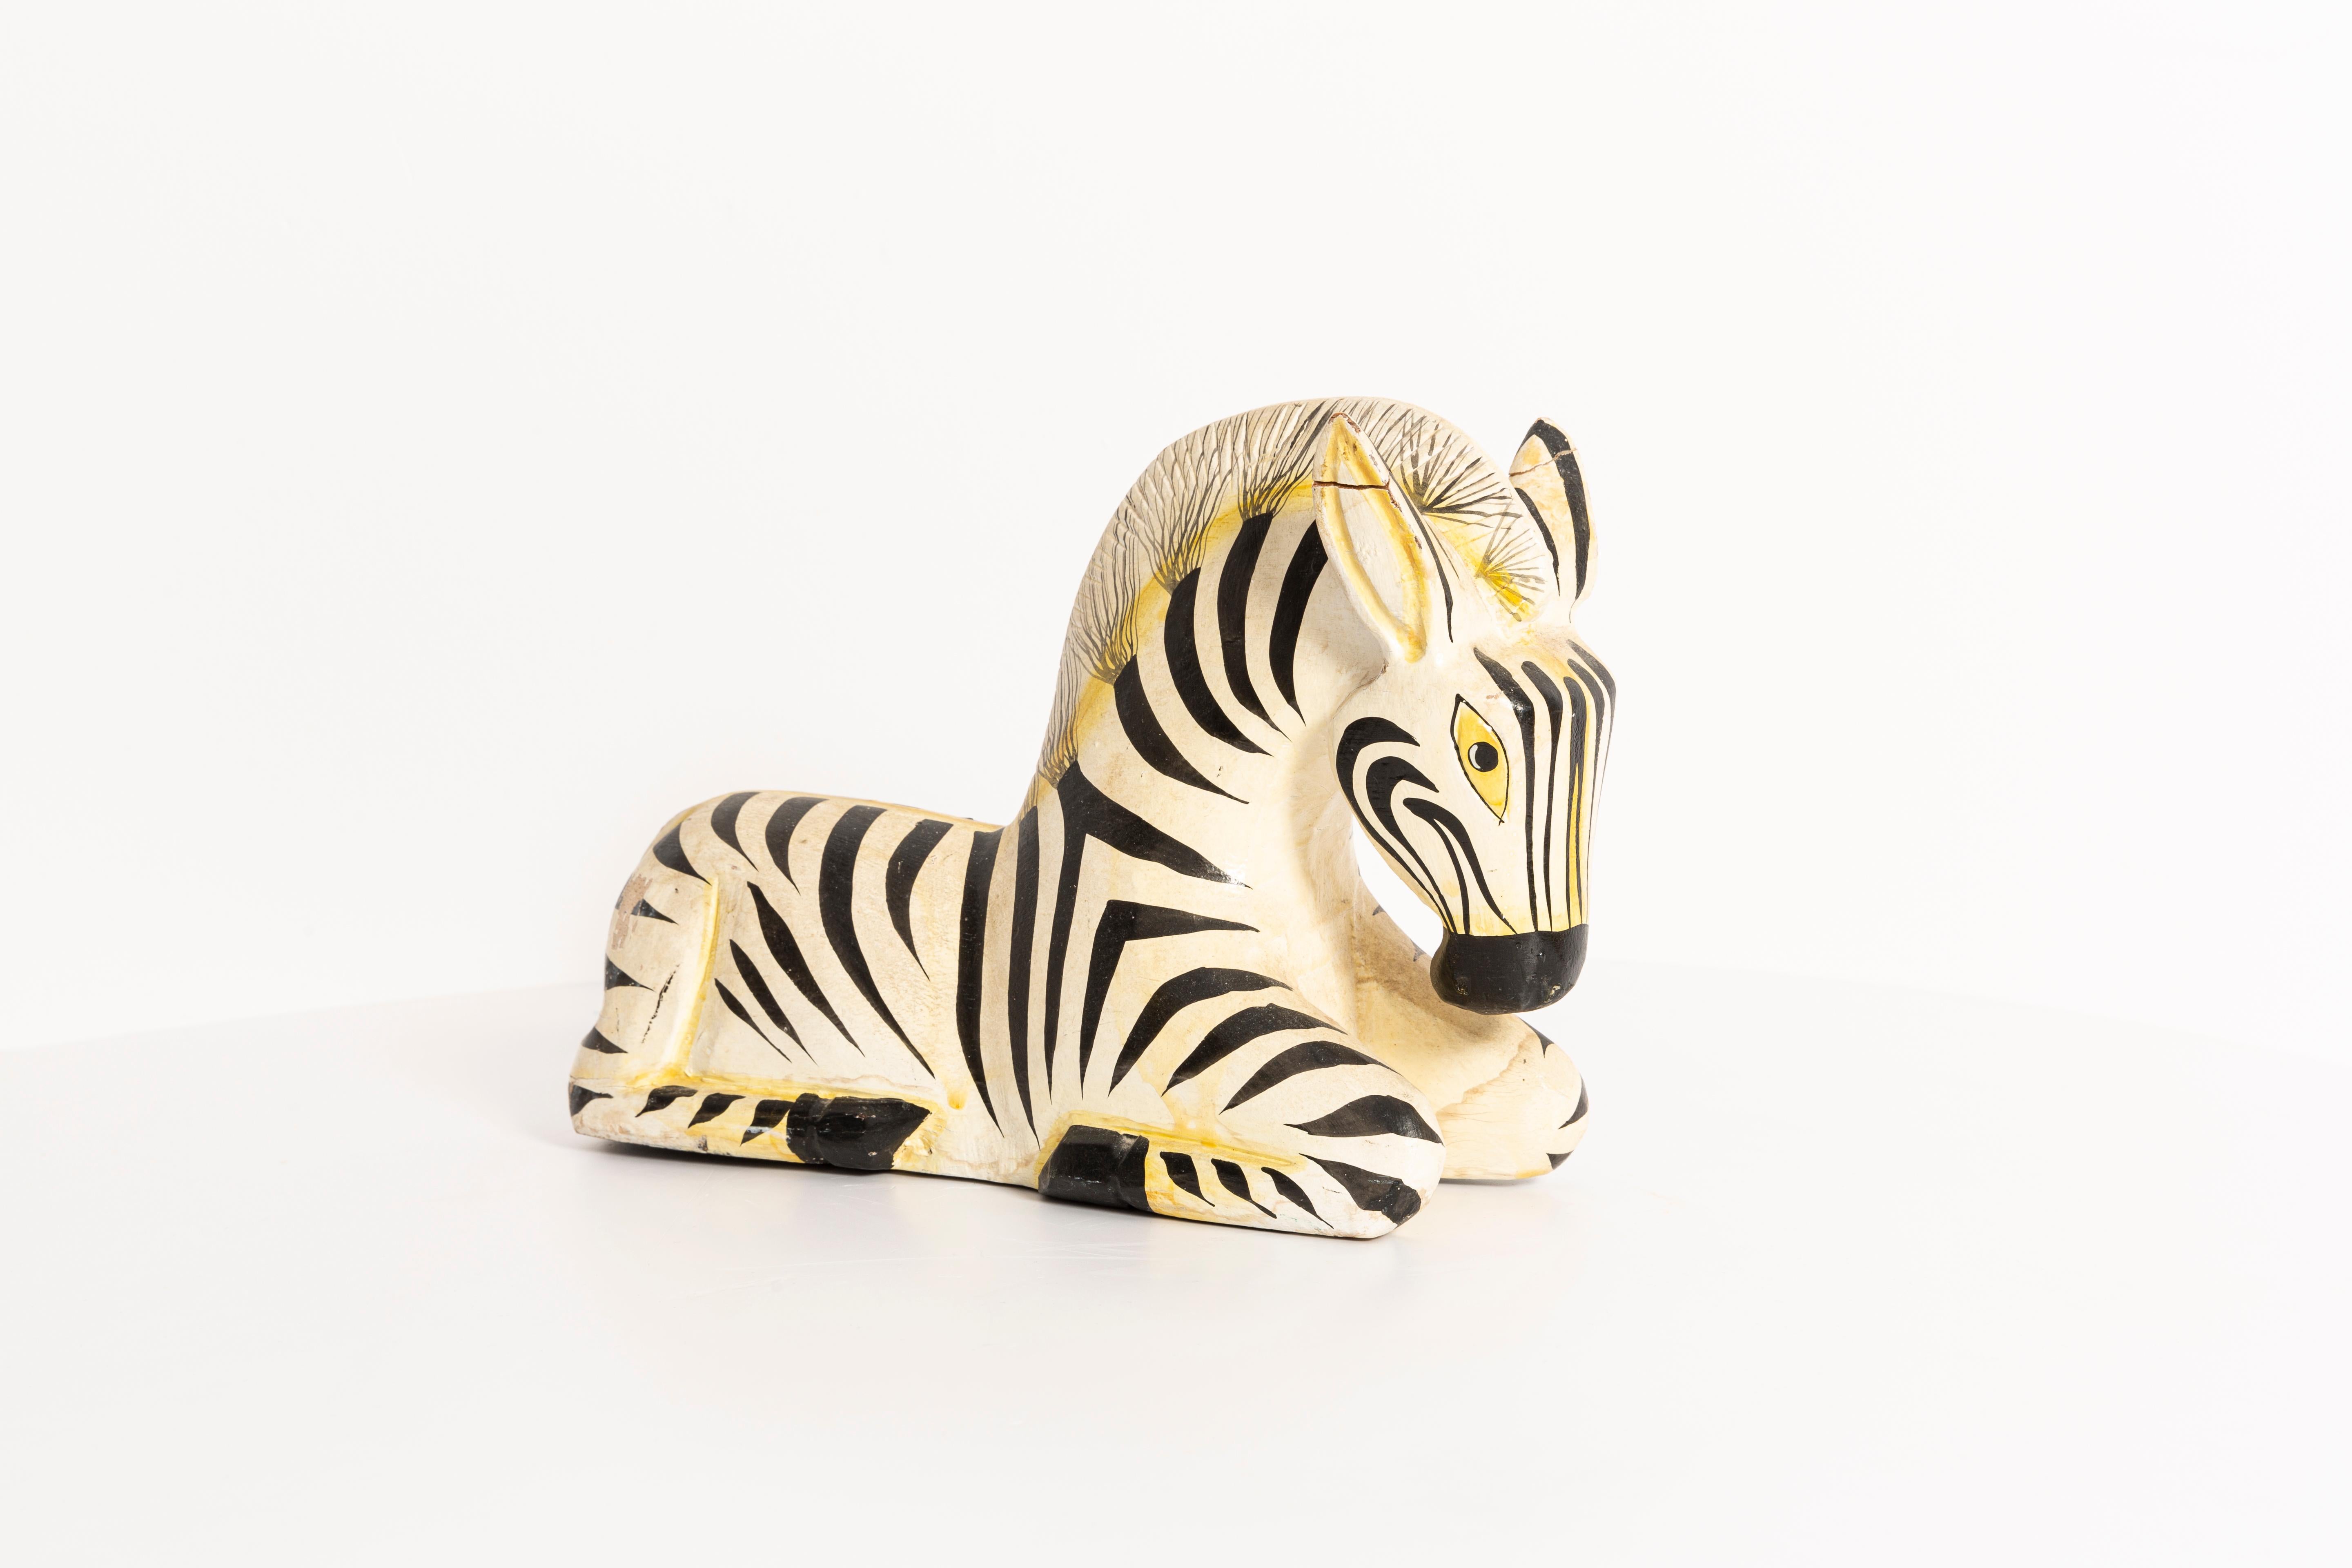 French sculpture, original good vintage condition. All damages on pictures. Zebra was produced in 60s in France.